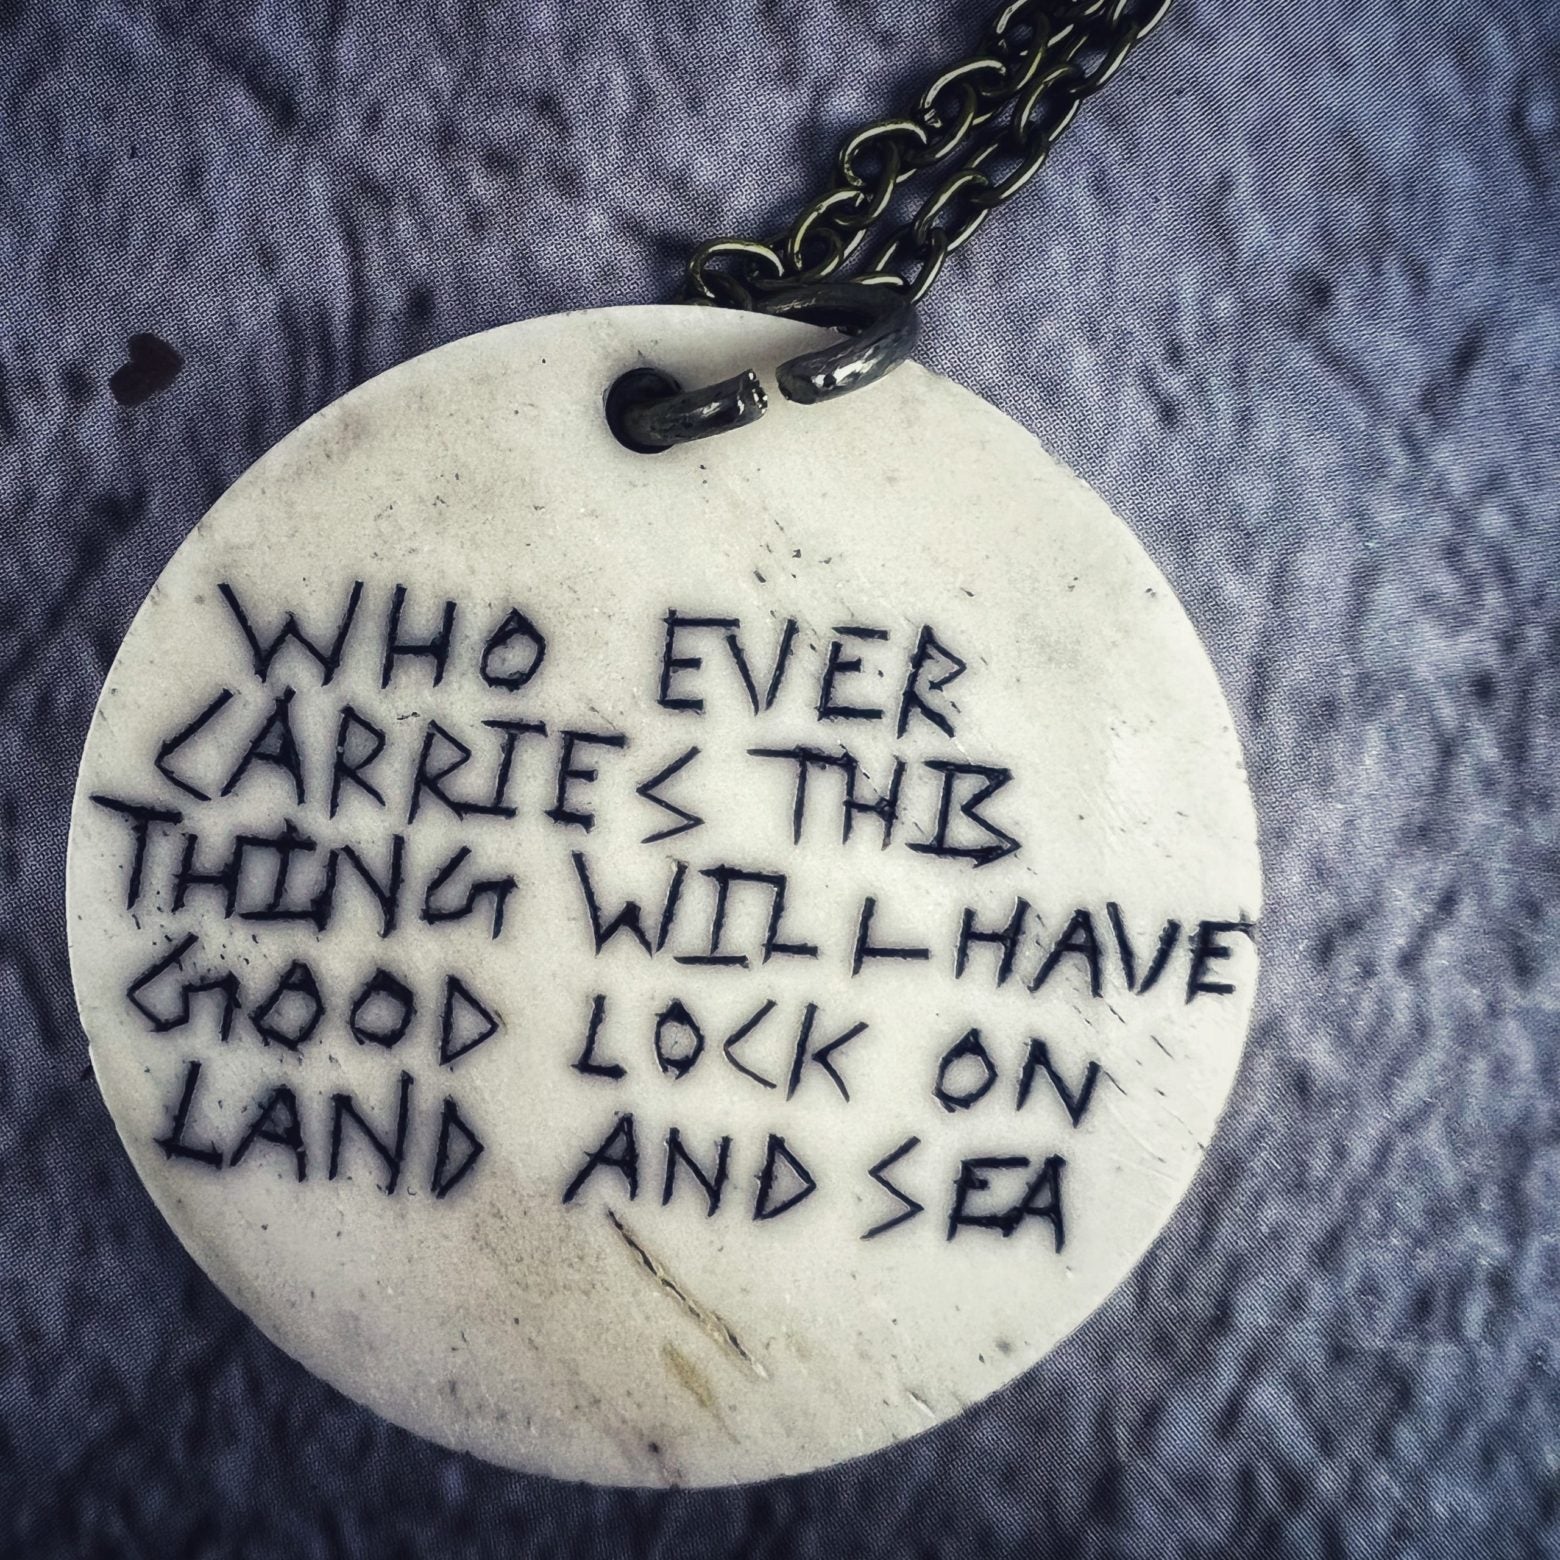 Good Luck on Land and Sea Bone Charm Necklace